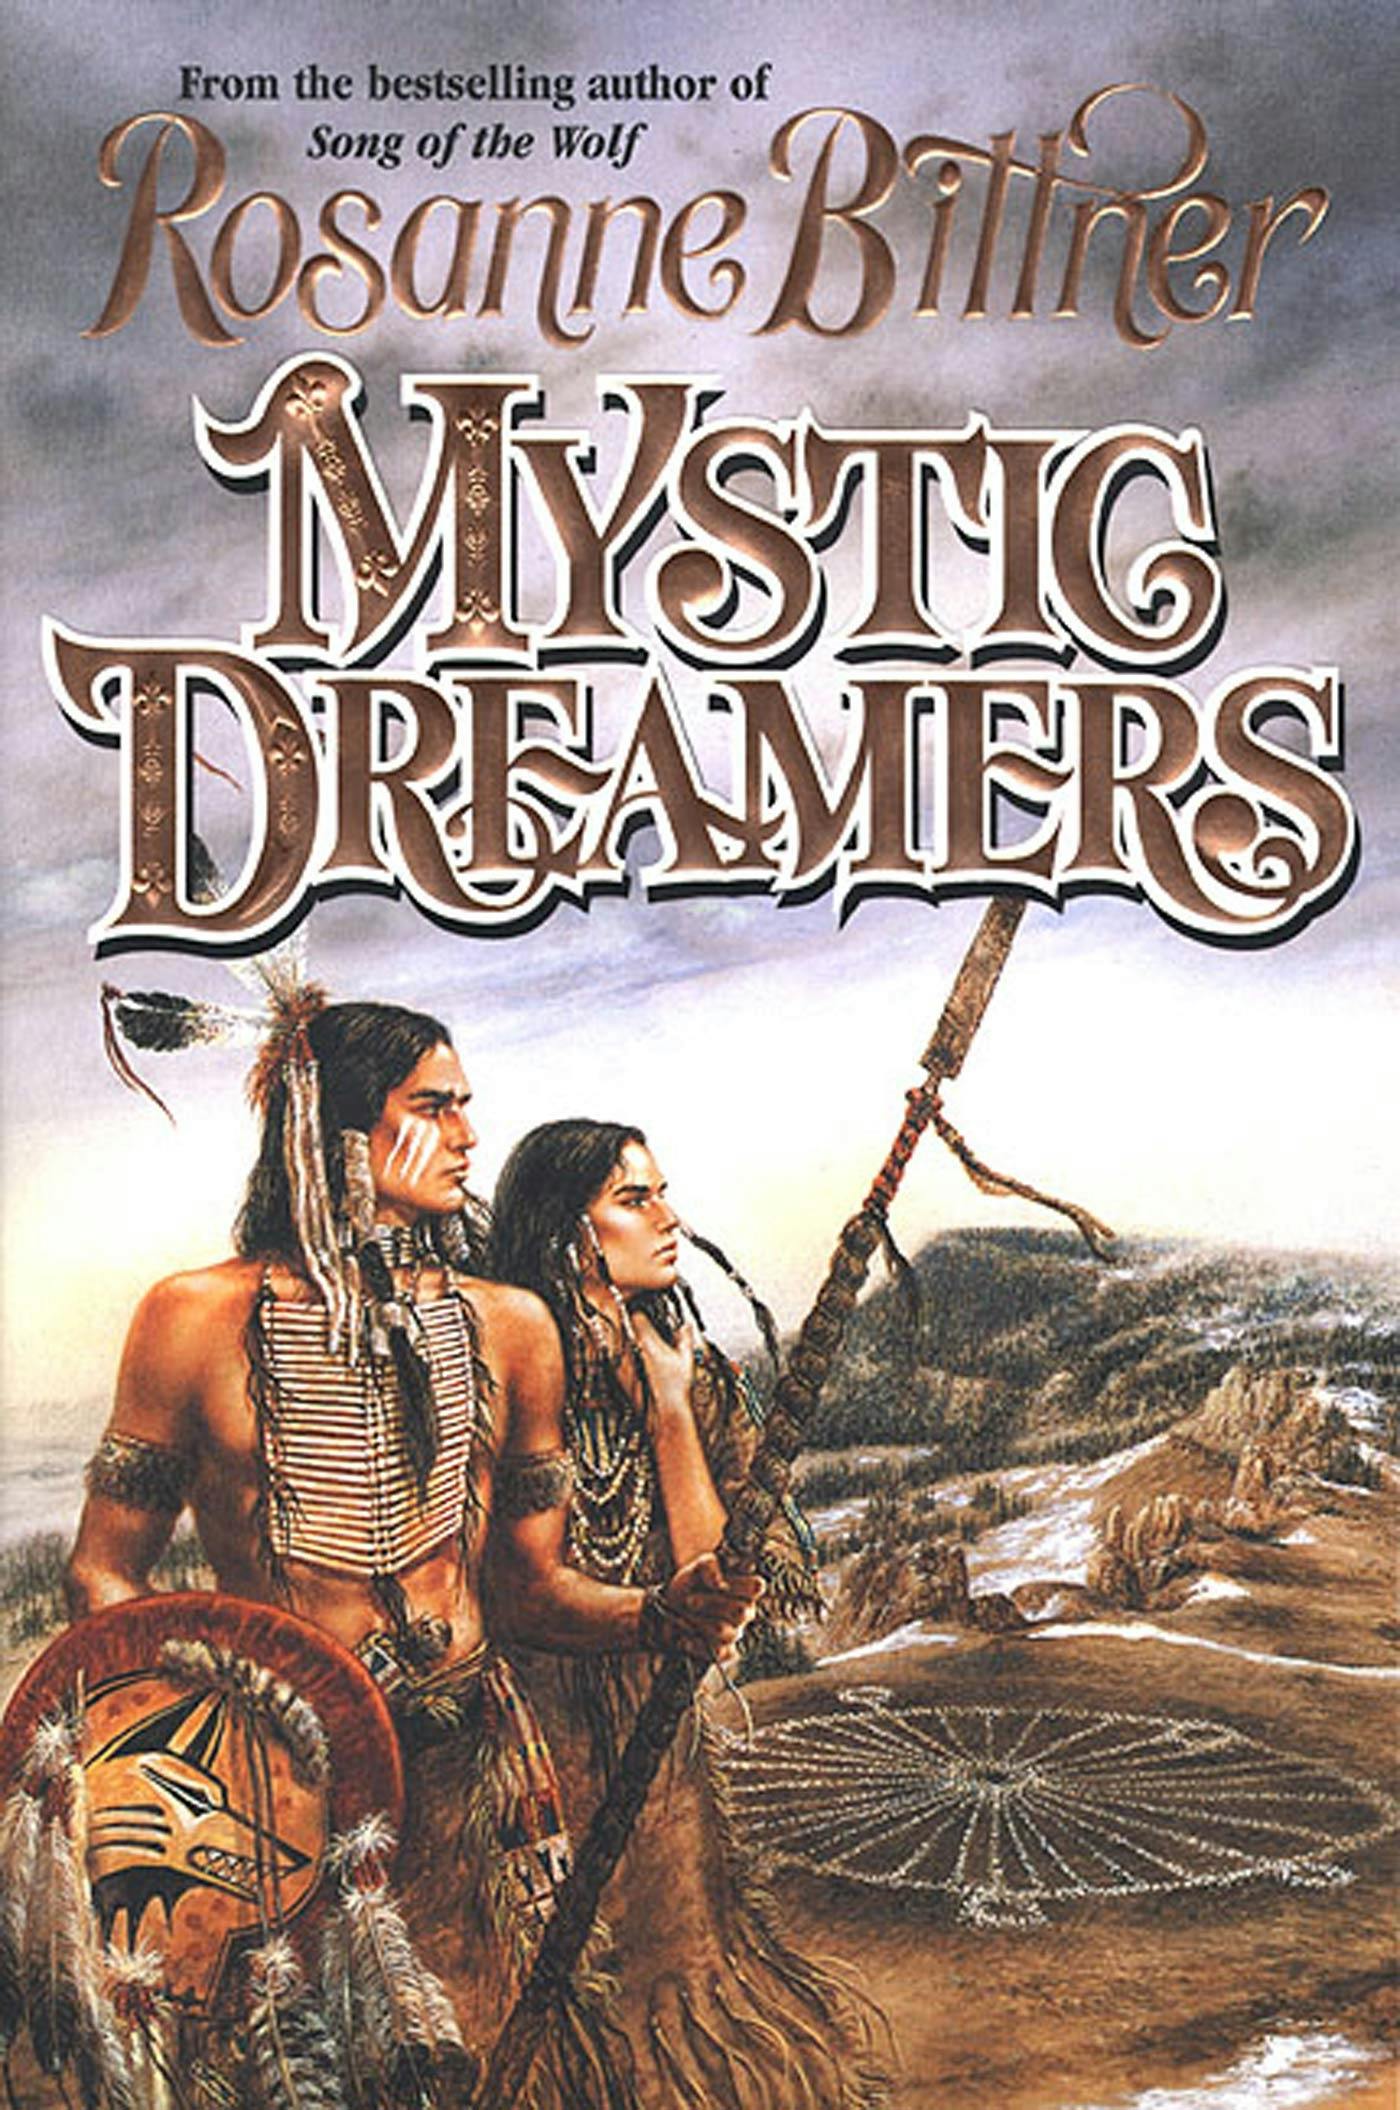 Cover for the book titled as: Mystic Dreamers